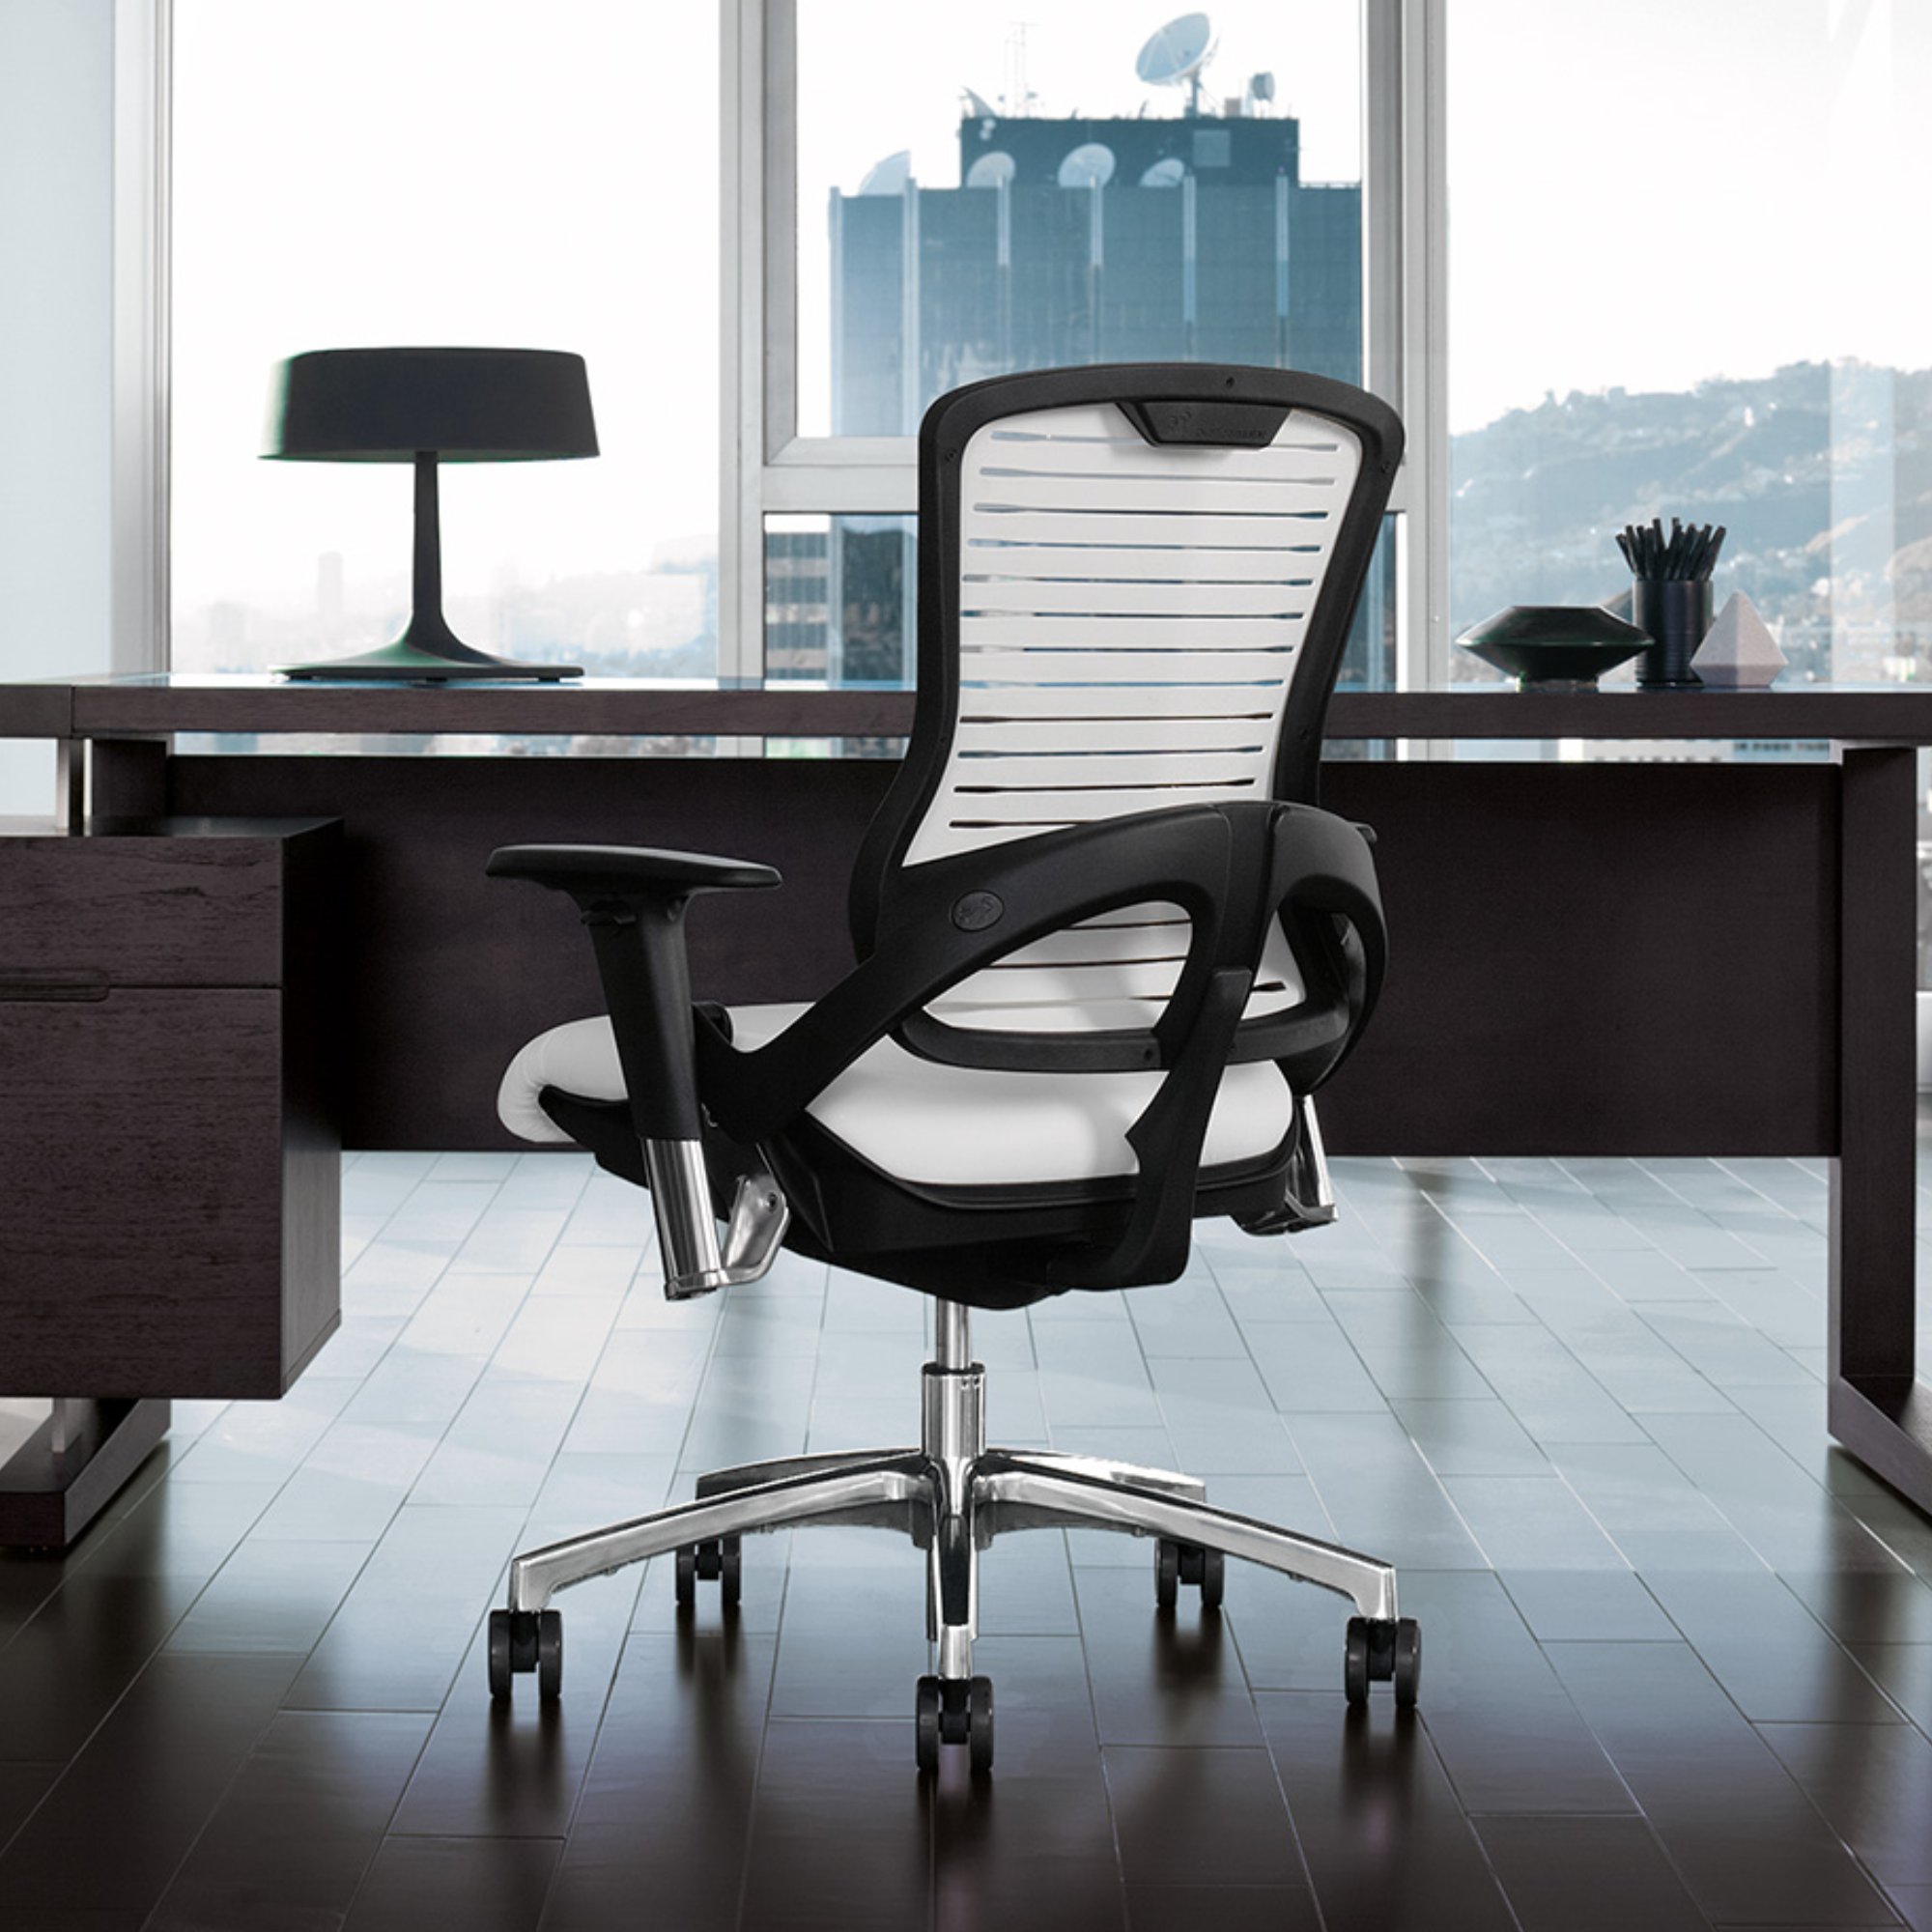 https://www.ergodirect.com/images/ErgoDirect/OM_Seating/16689/alternative/ED-OM5-EX-Gaming-Chair-Tall-Back-Executive-Task-Chair-by-OM-Seating_7.jpg